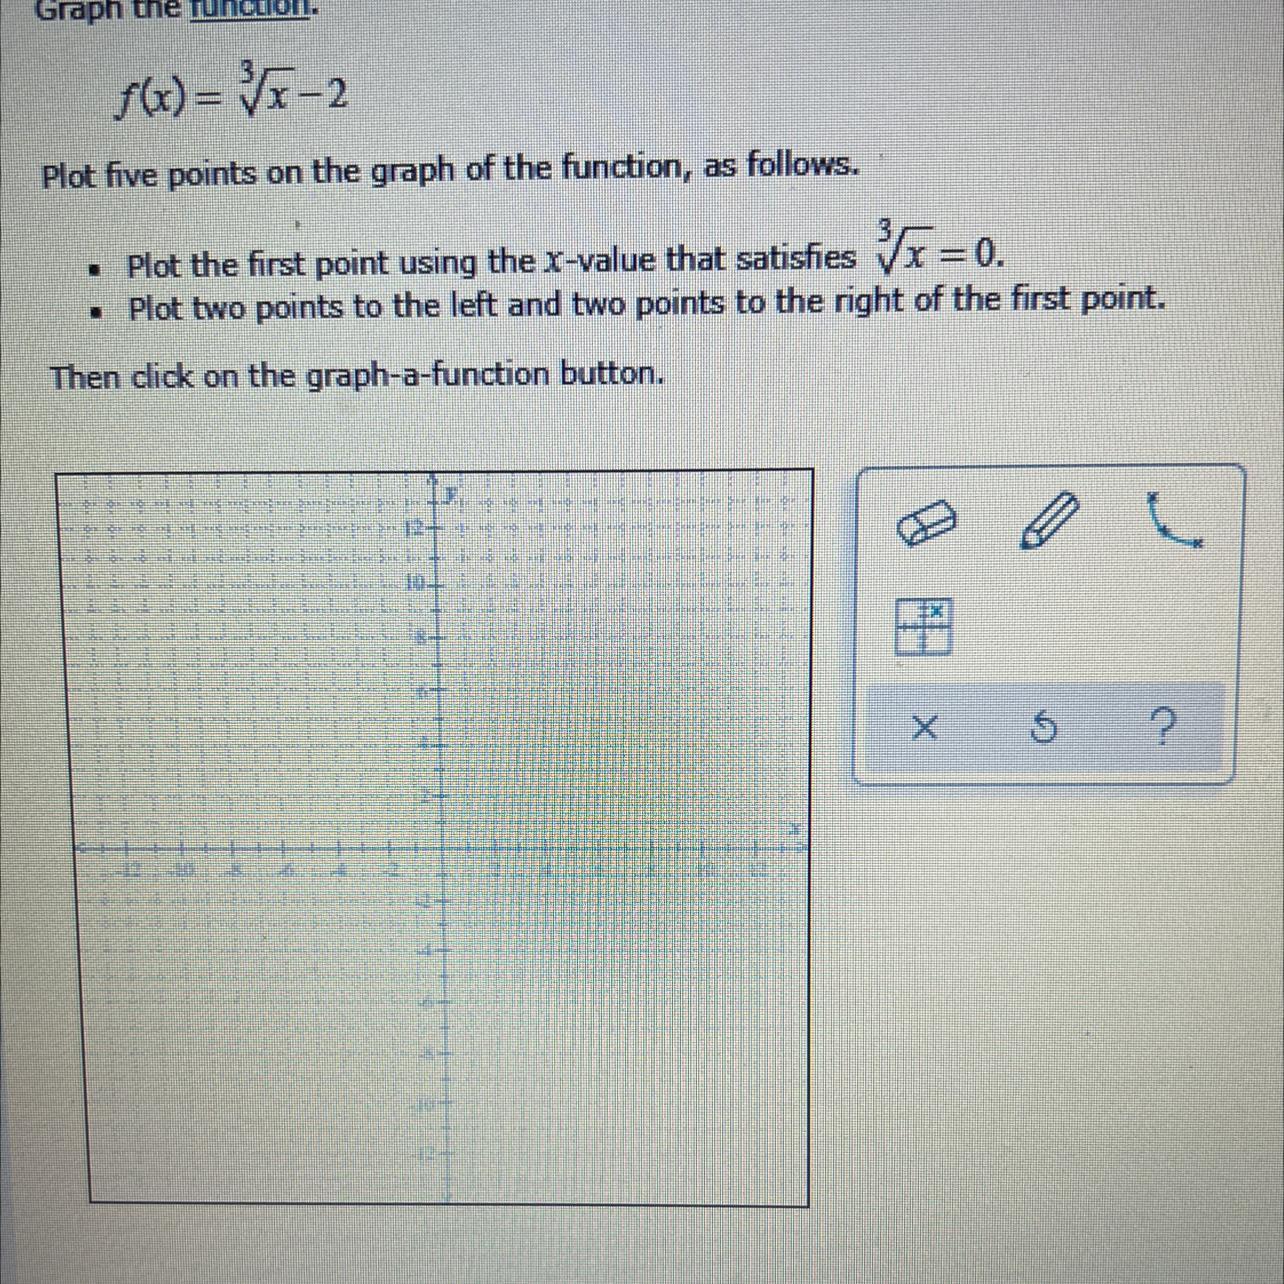 I Need Help Graphing And I Need To Know The Coordinates. The Graph Goes Up To 12.